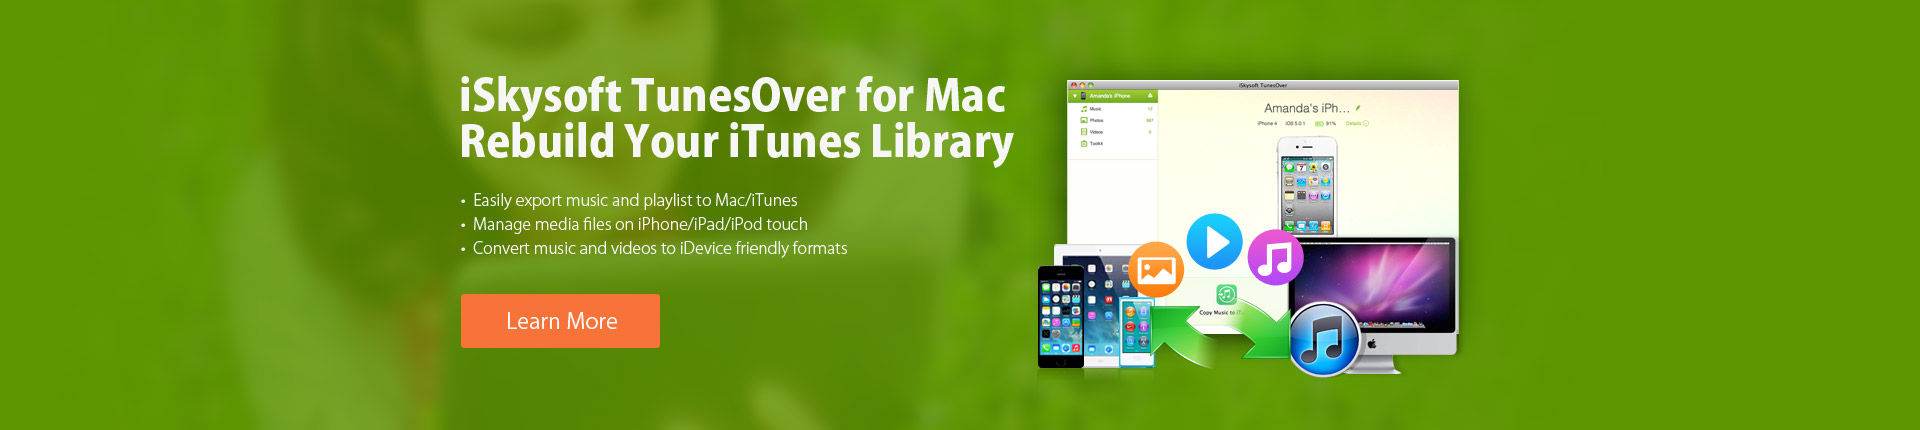 TunesOver for Mac